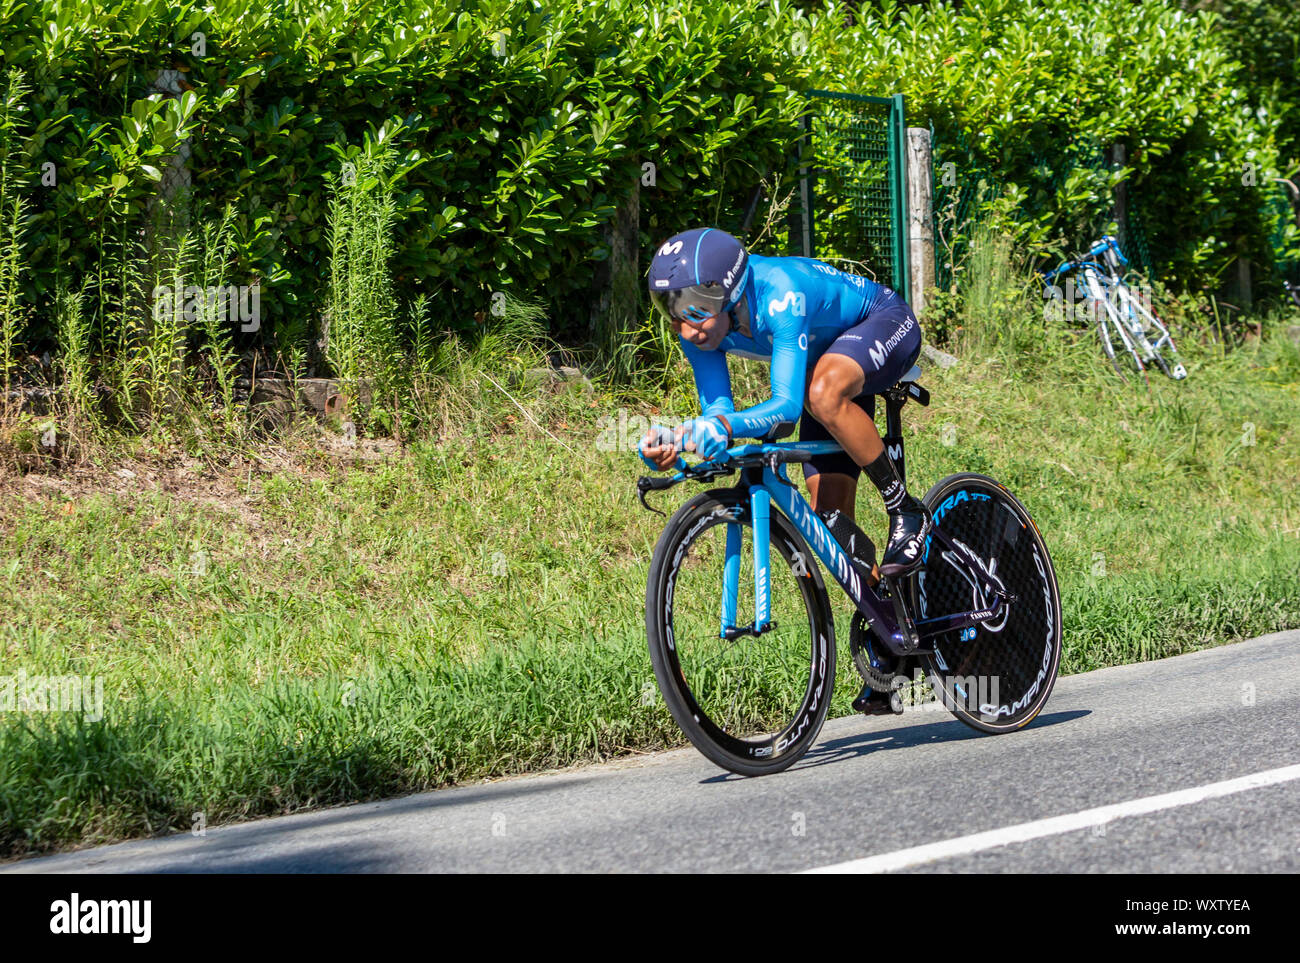 Bosdarros, France - July 19, 2019: The Colombian cyclist Nairo Quintana of Team Movistar riding during stage 13, individual time trial, of Le Tour de Stock Photo